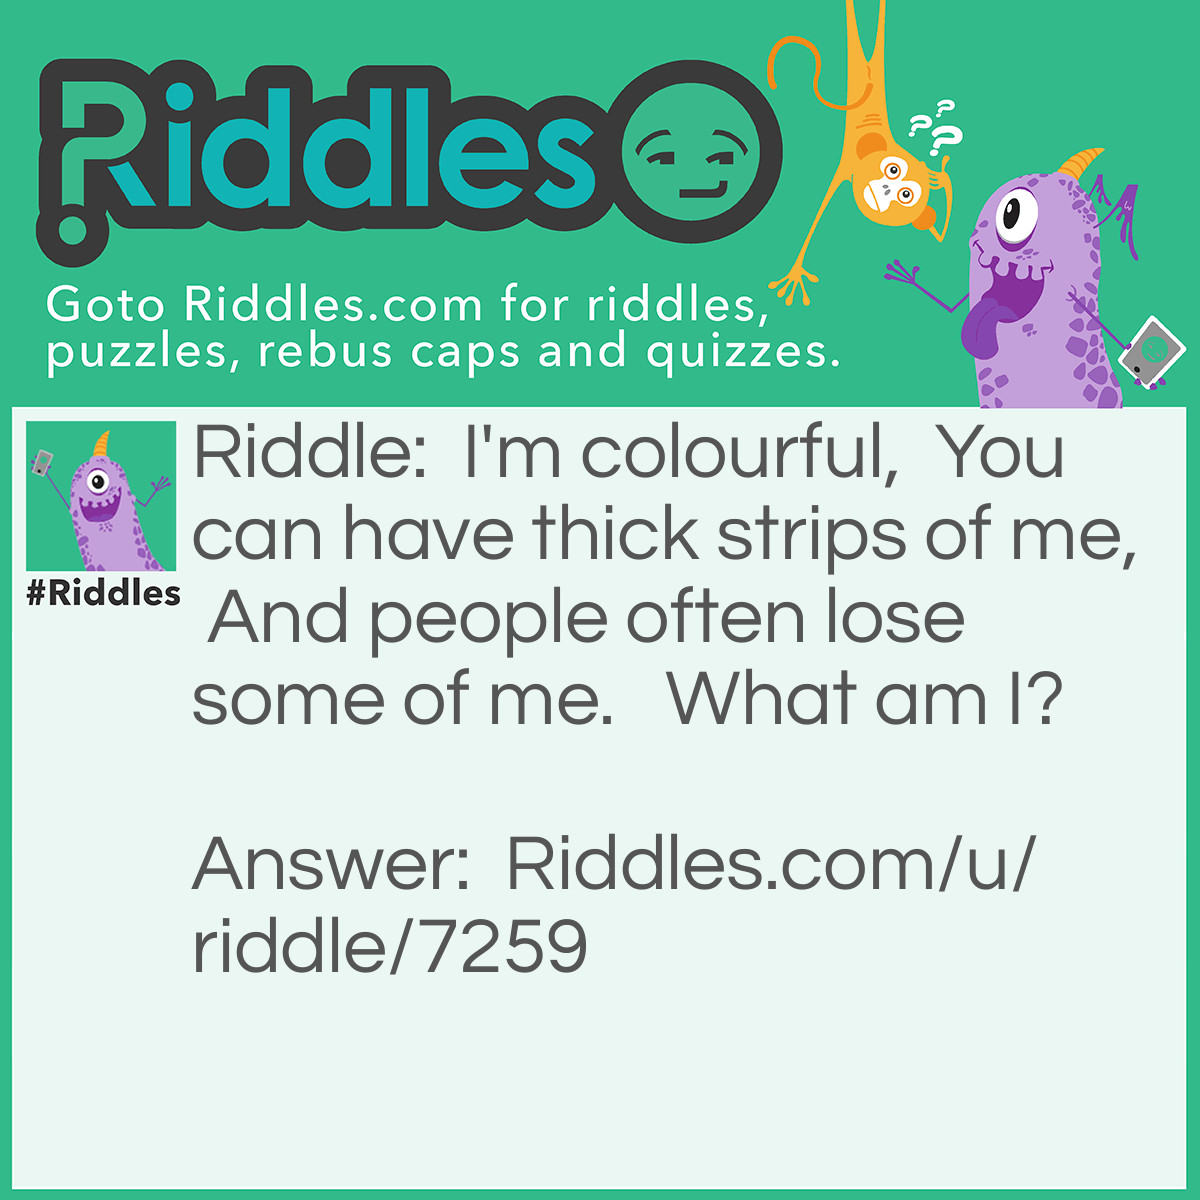 Riddle: I'm colourful,  You can have thick strips of me,  And people often lose some of me.   What am I? Answer: Crayons.